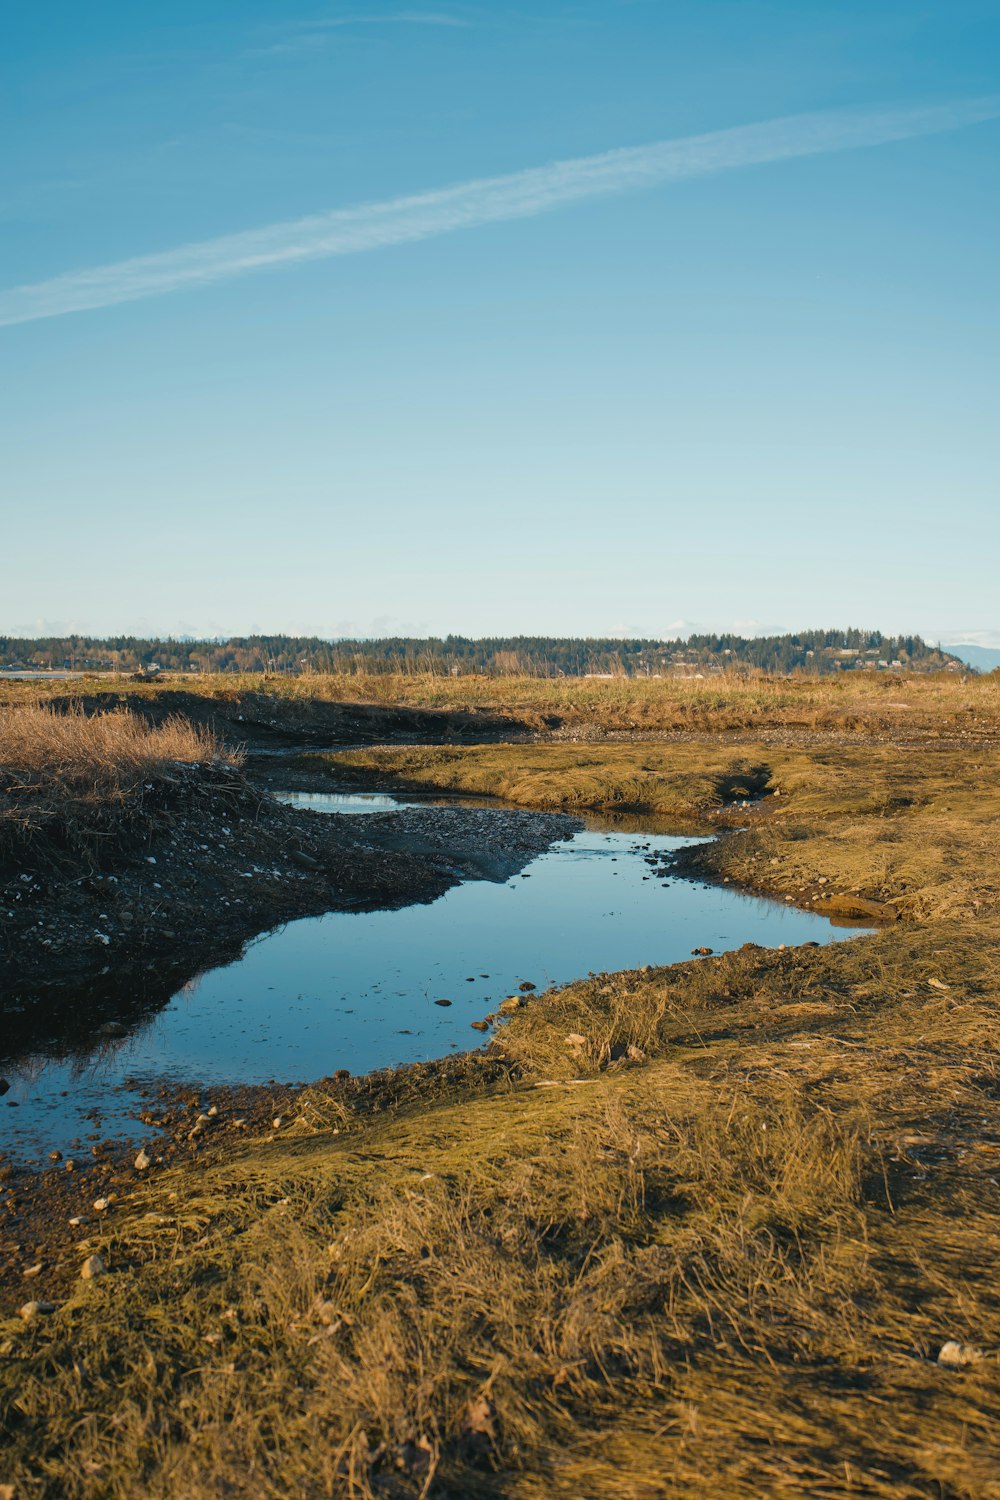 a small body of water sitting in a dry grass field